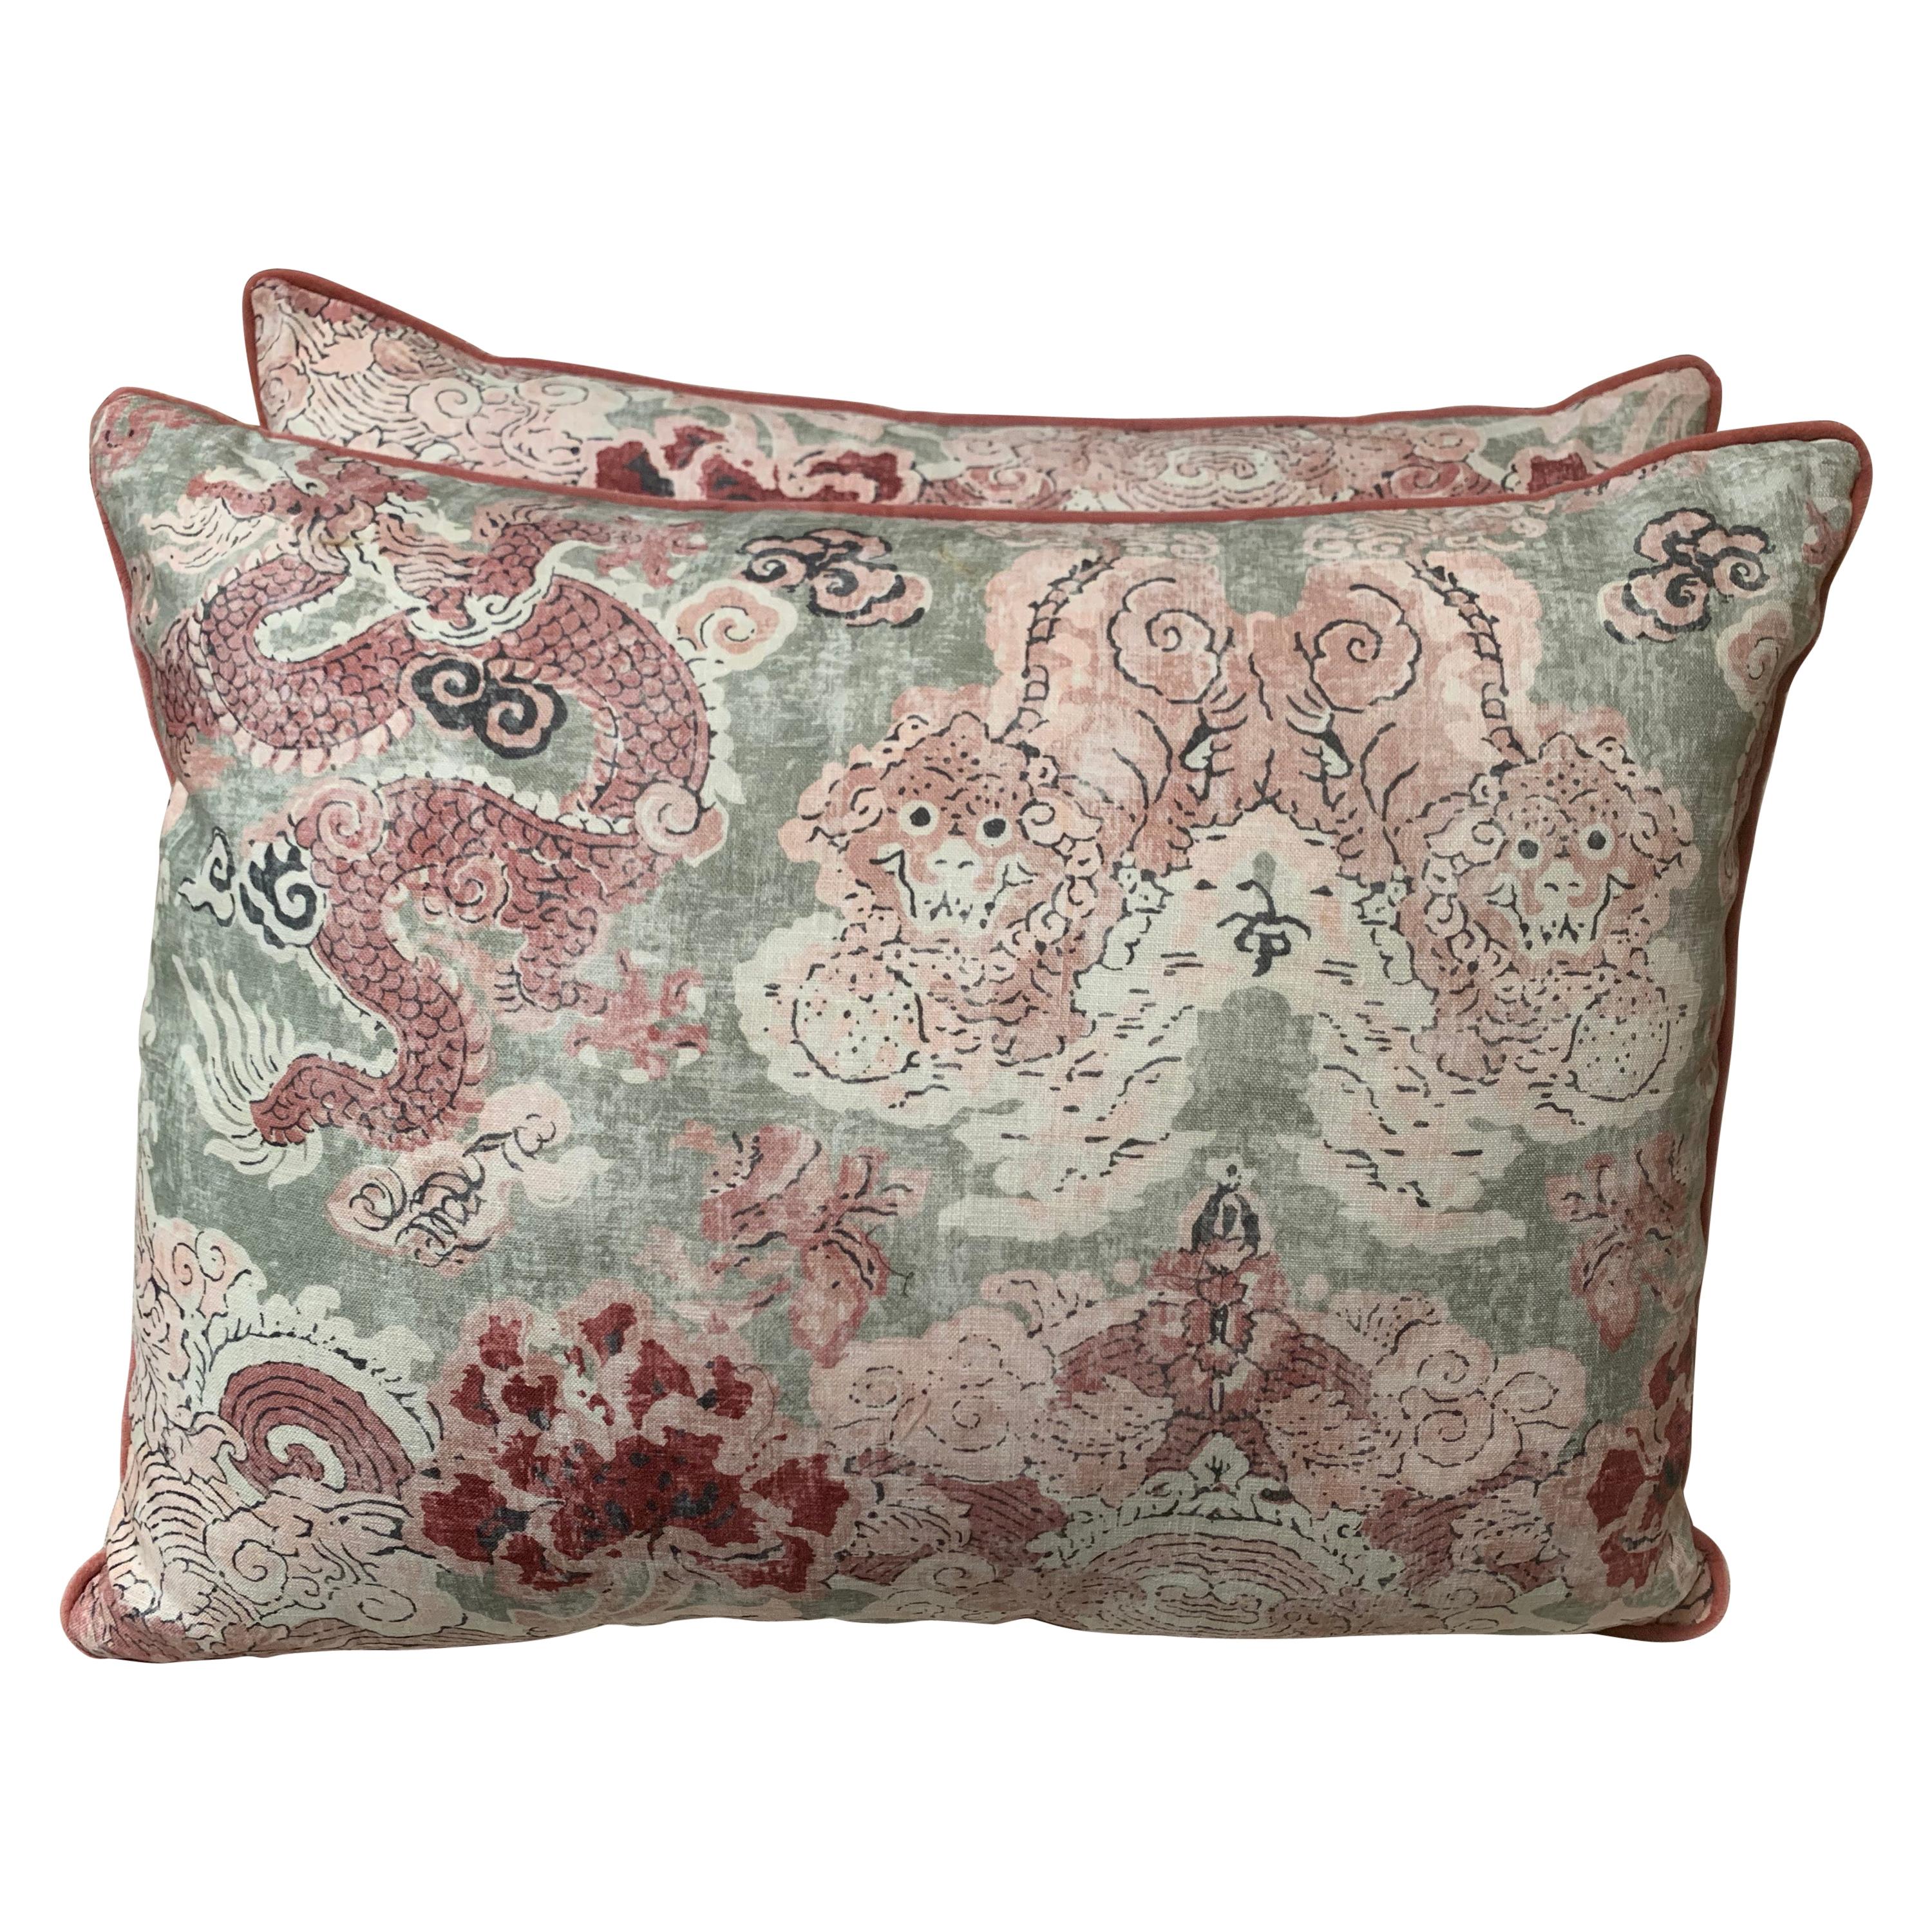 Pair of Custom Chinoiserie Style Printed Cotton Pillows by Melissa Levinson